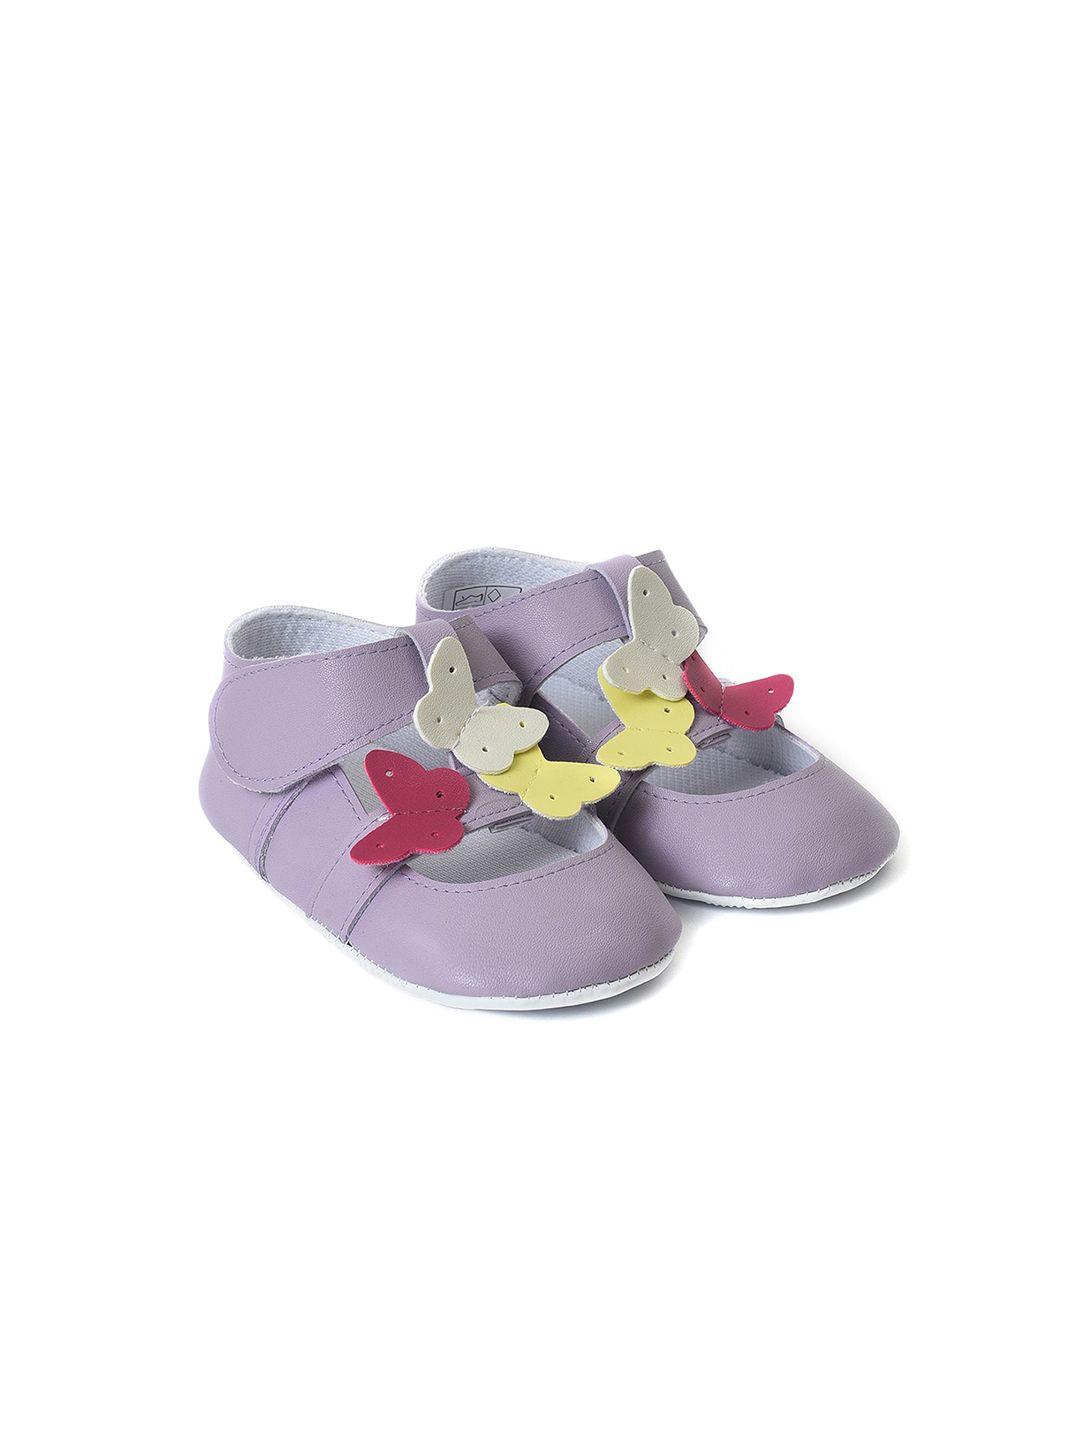 miarcus infant girls butterfly applique detail lightweight sneakers